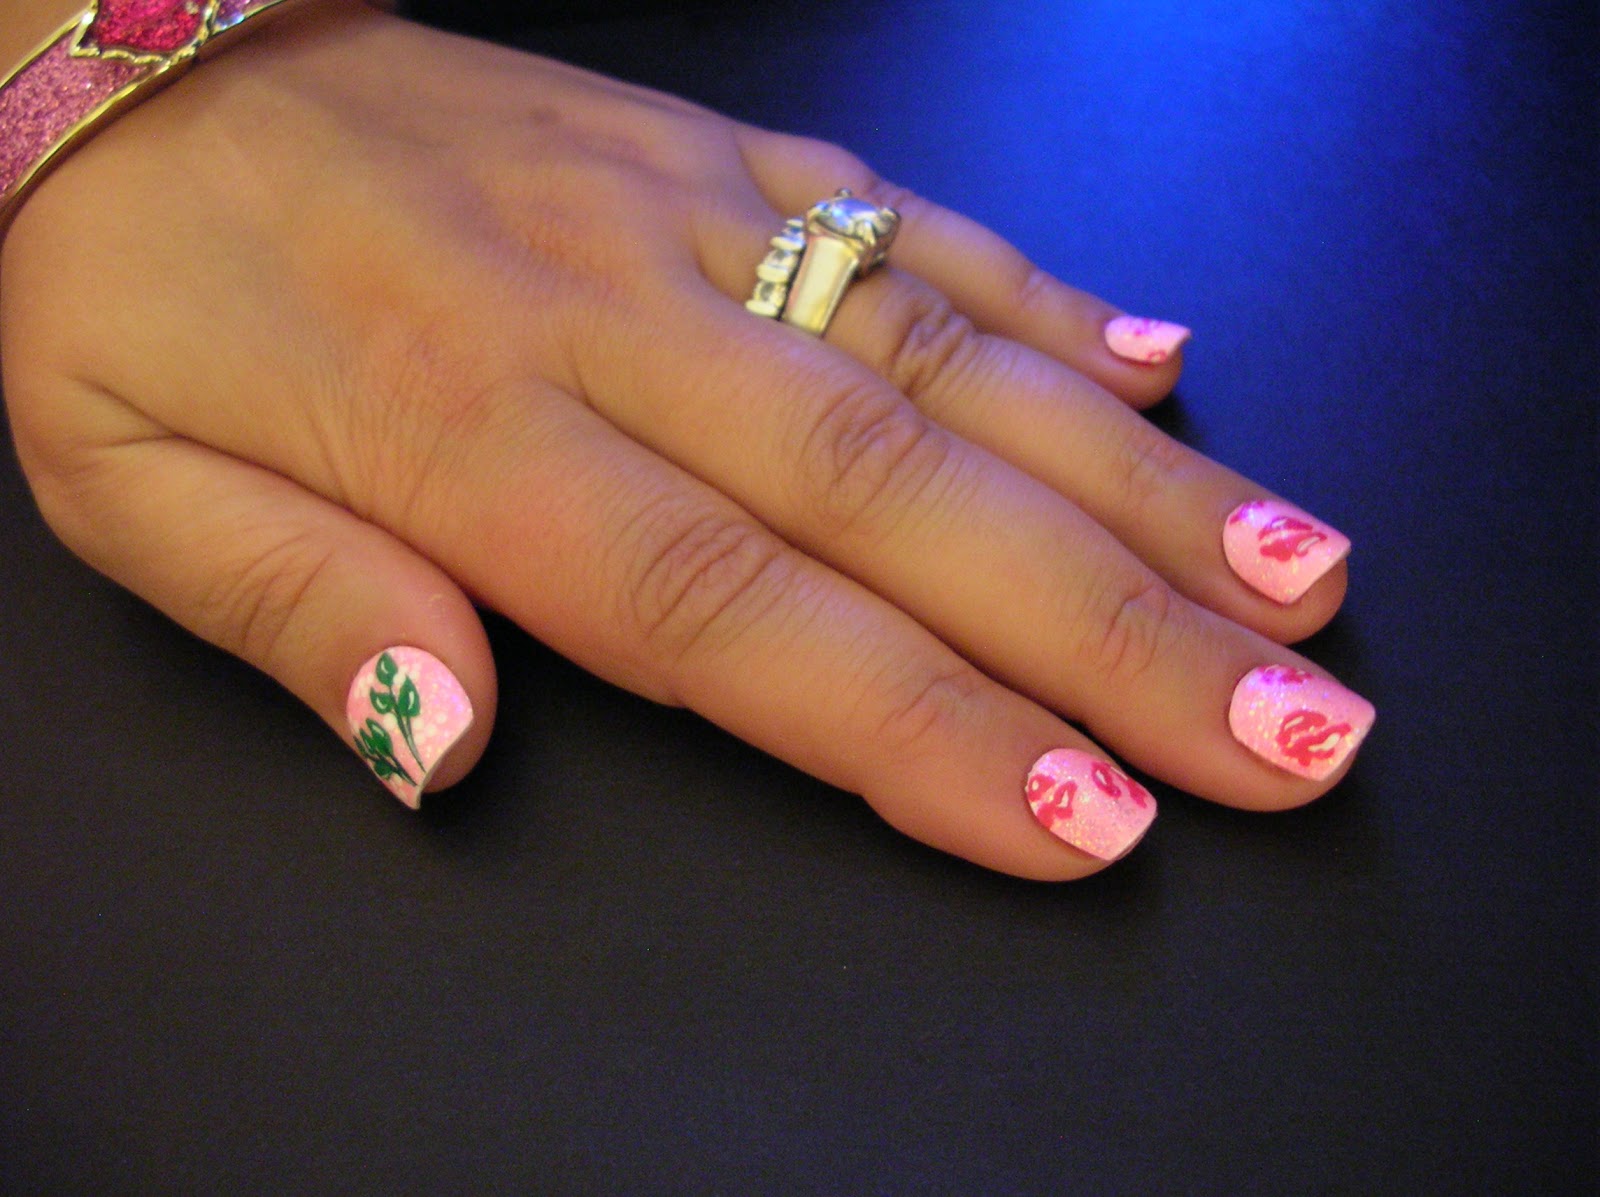 ecklipsed by color: On the Eighth Day of Christmas, my nail art gave to ...